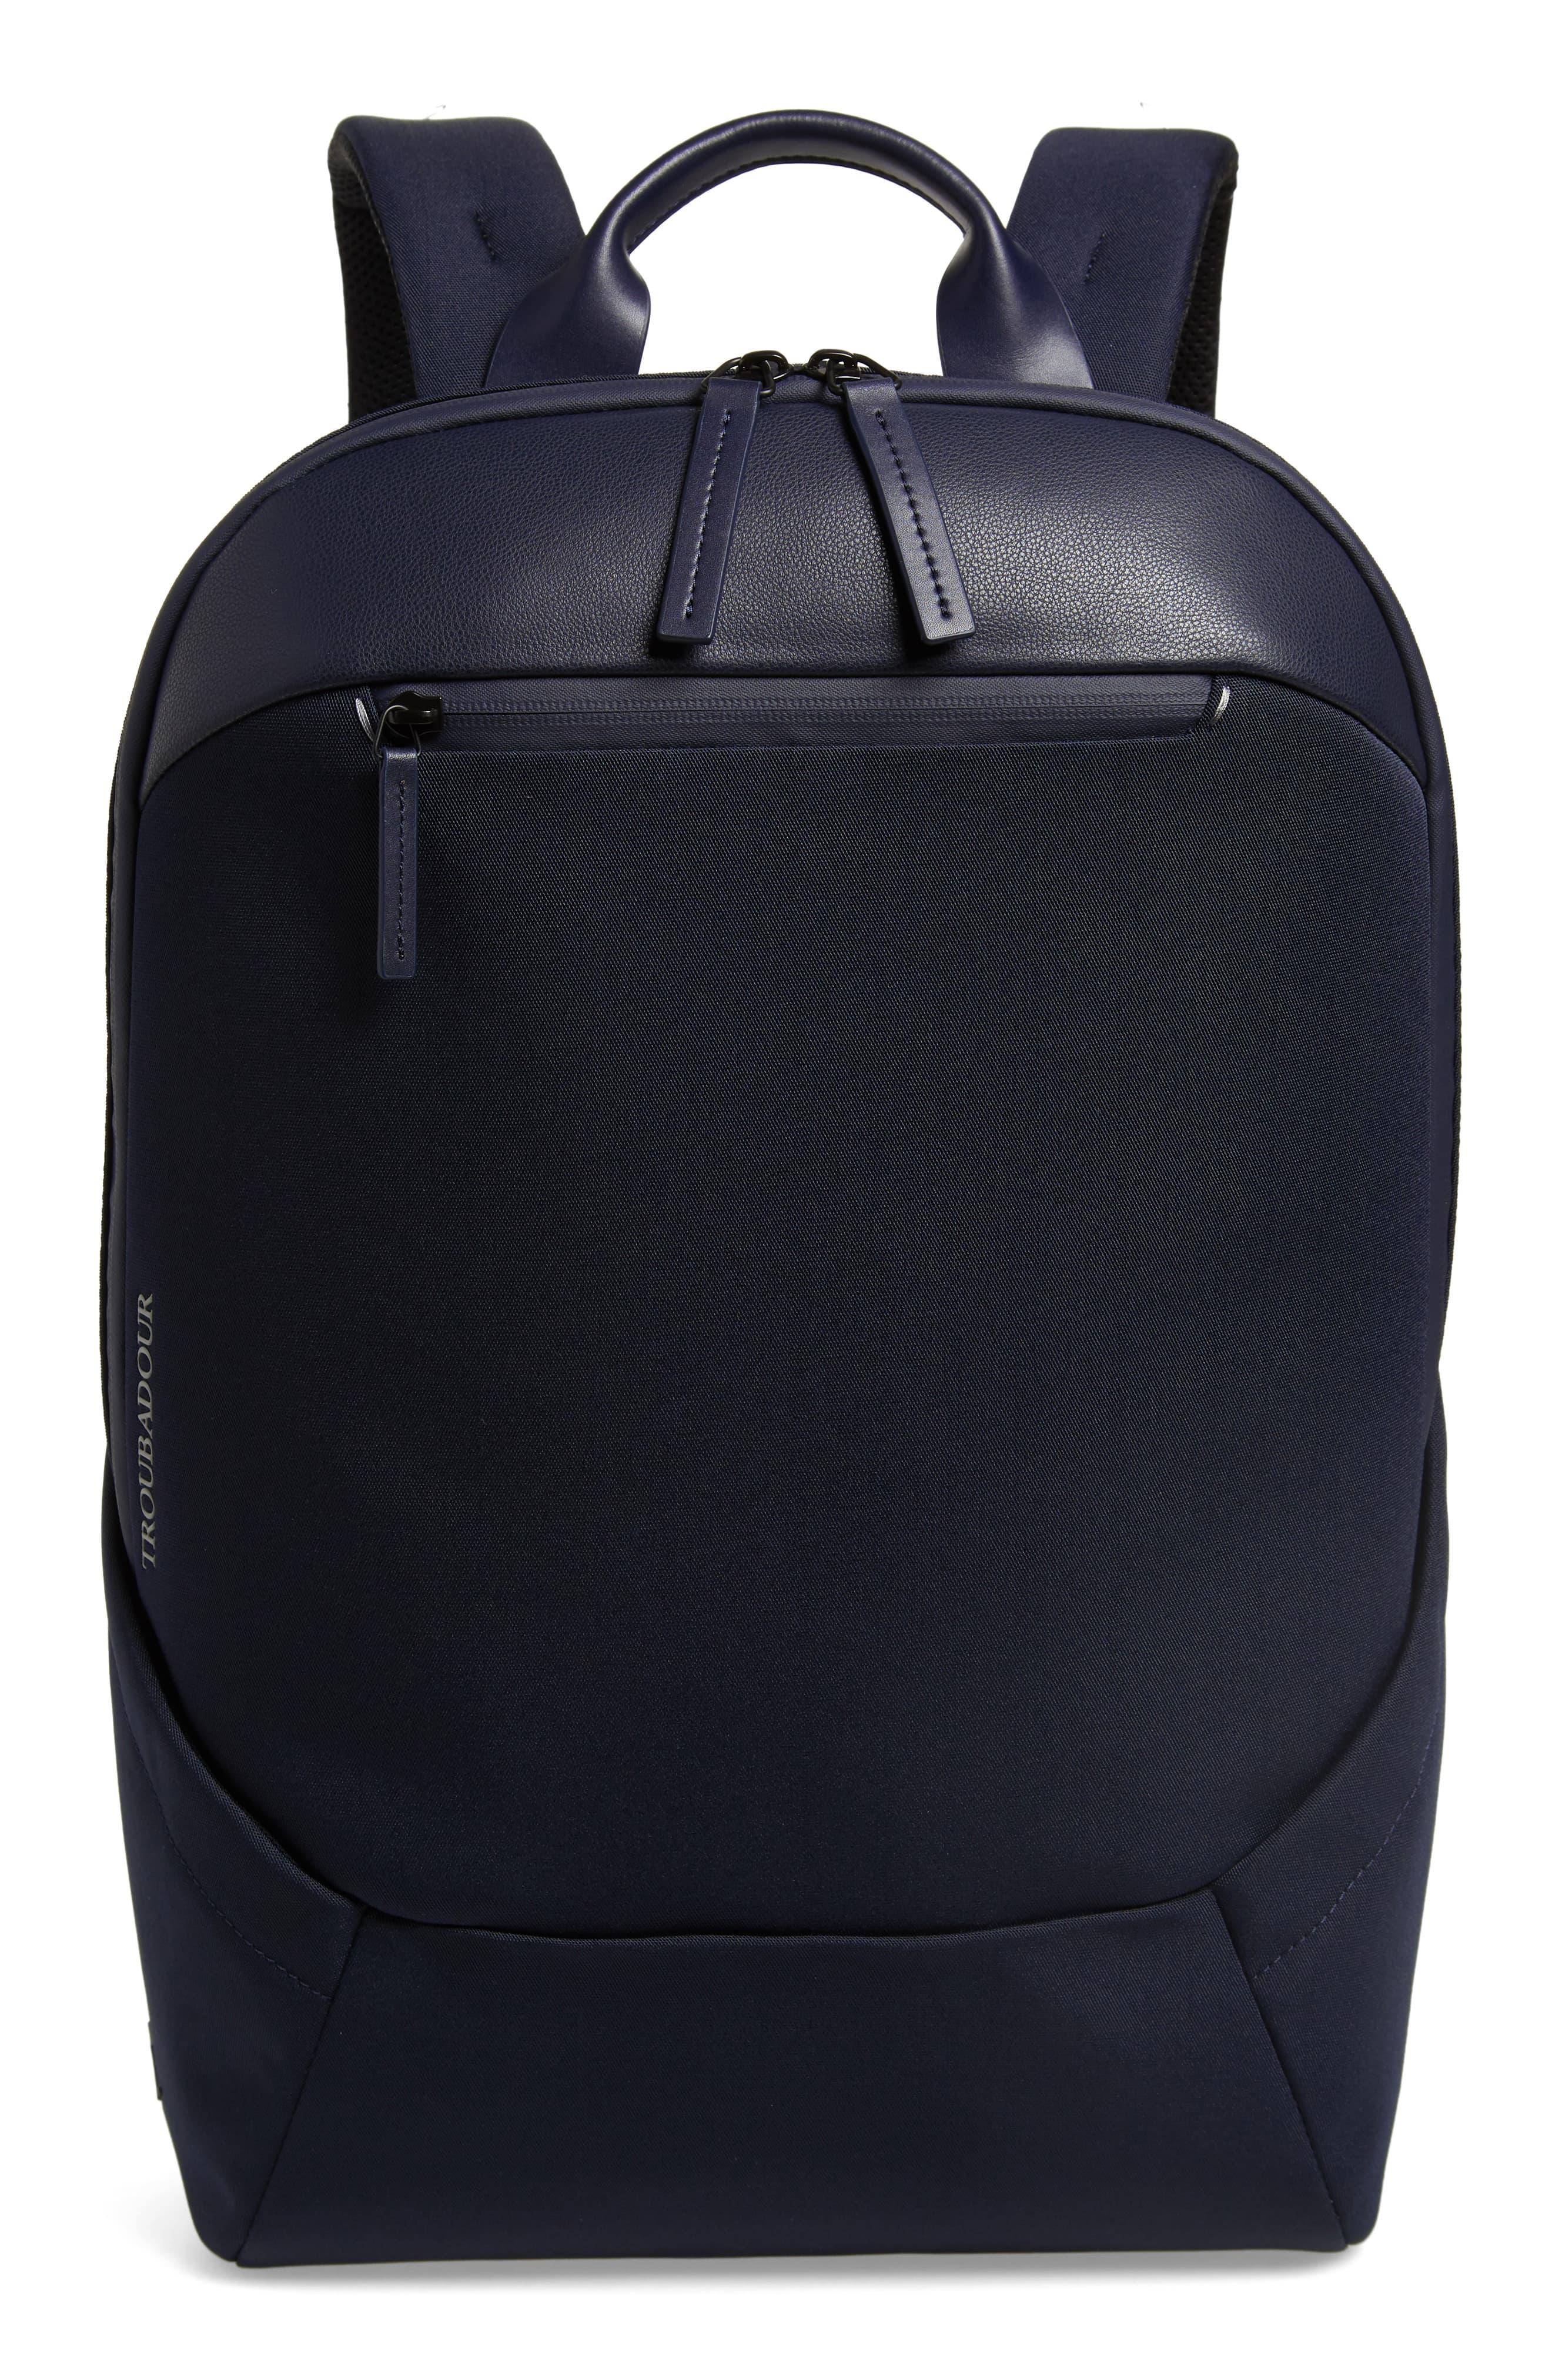 Troubadour Apex Backpack in Blue for Men - Lyst